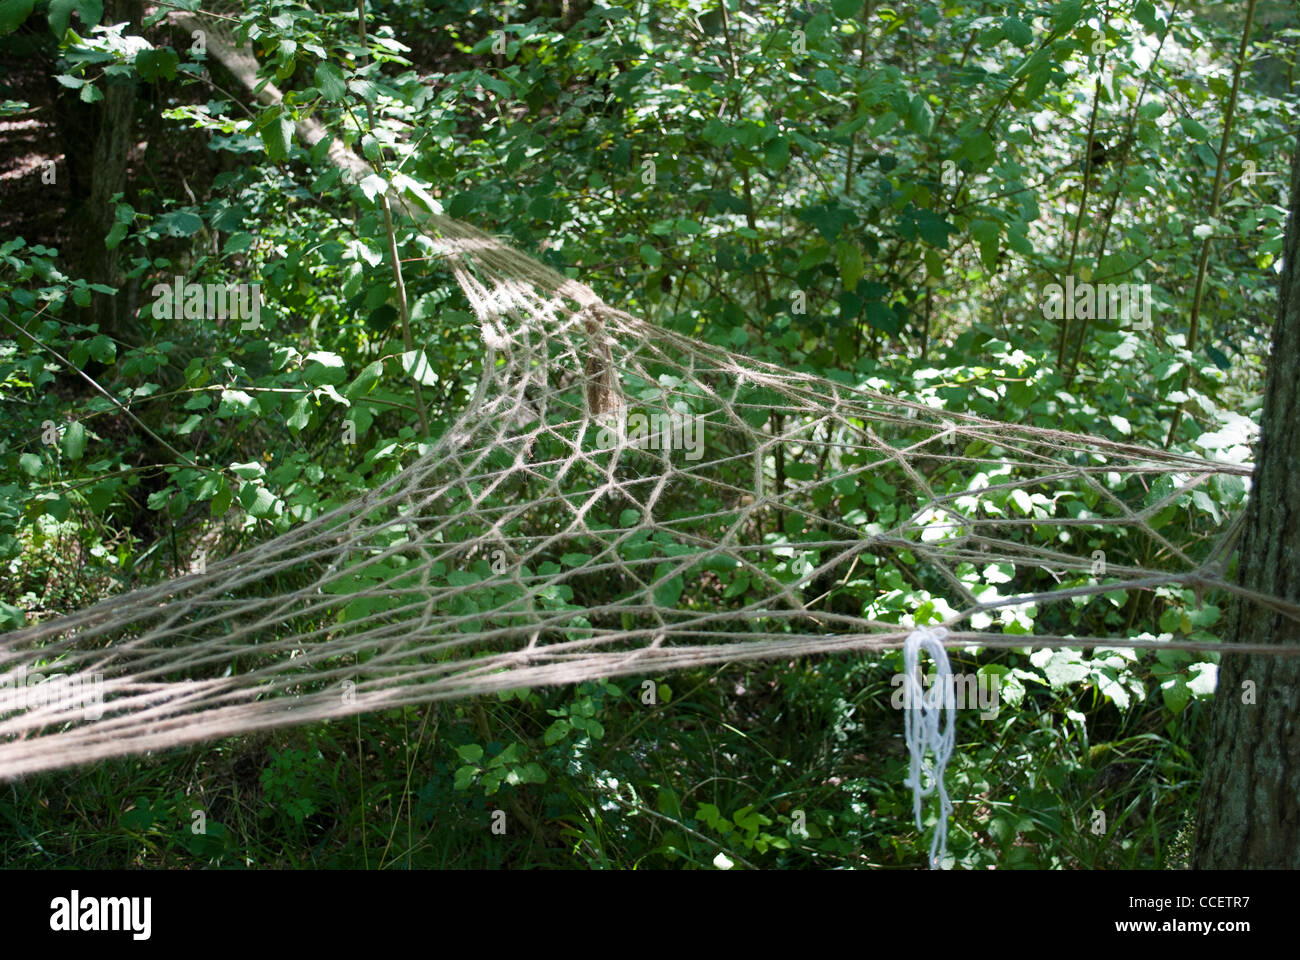 Rope sculpture stretched between trees Stock Photo